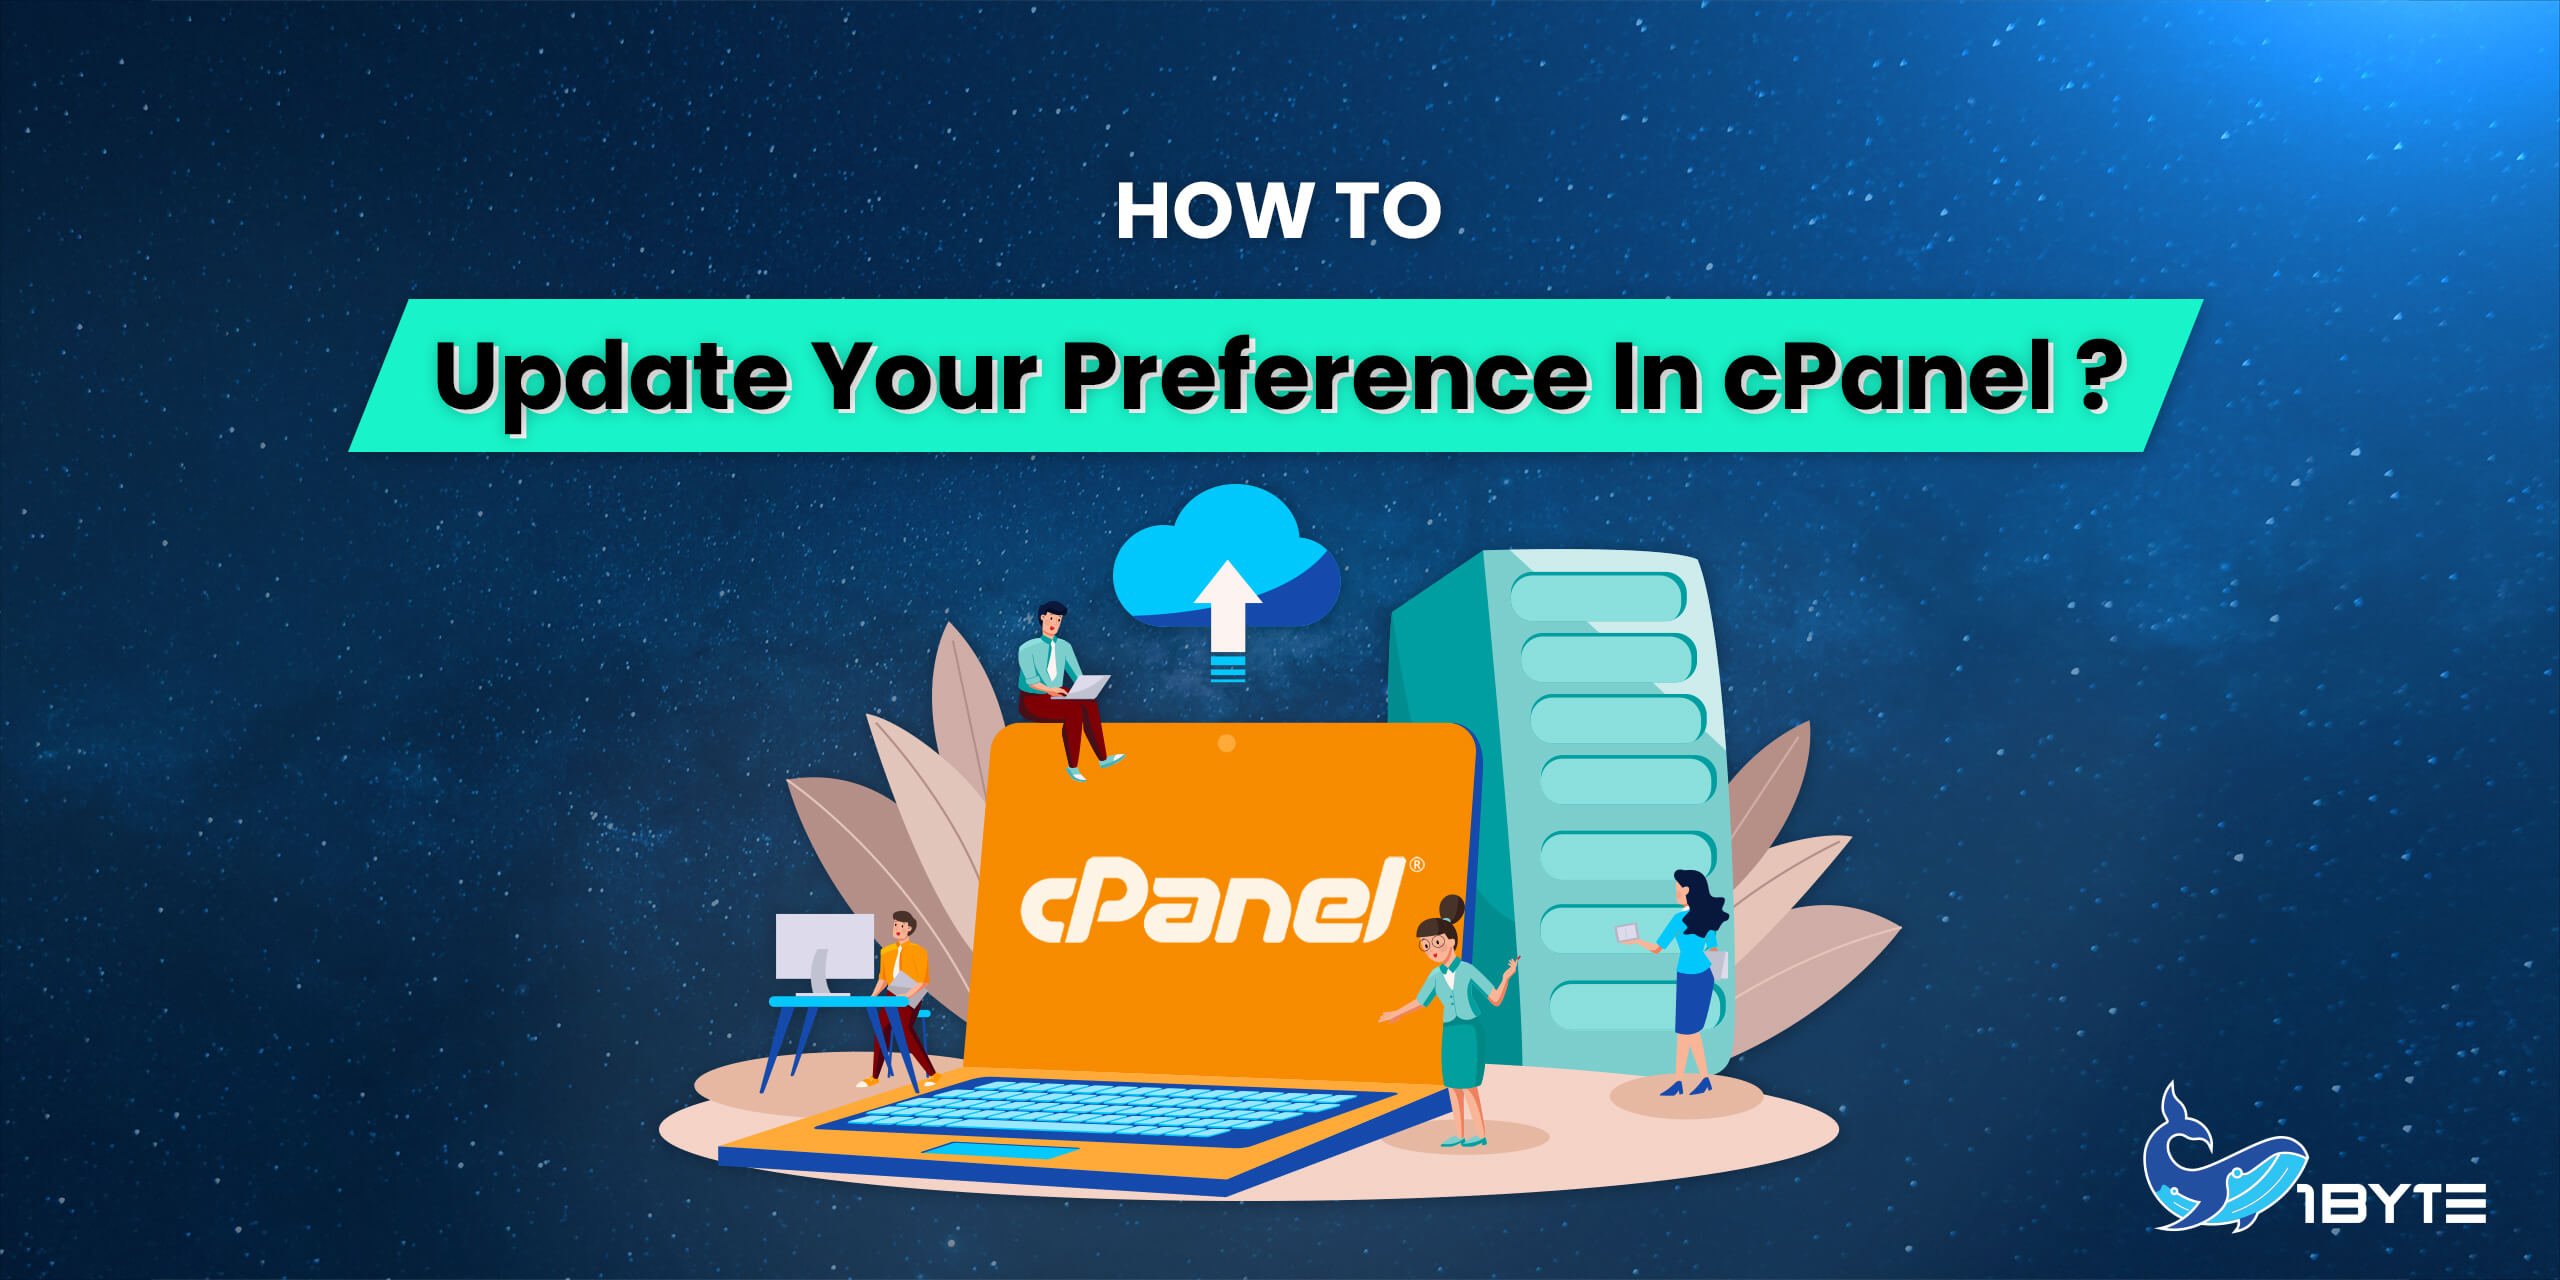 How to update your preference in cPanel?